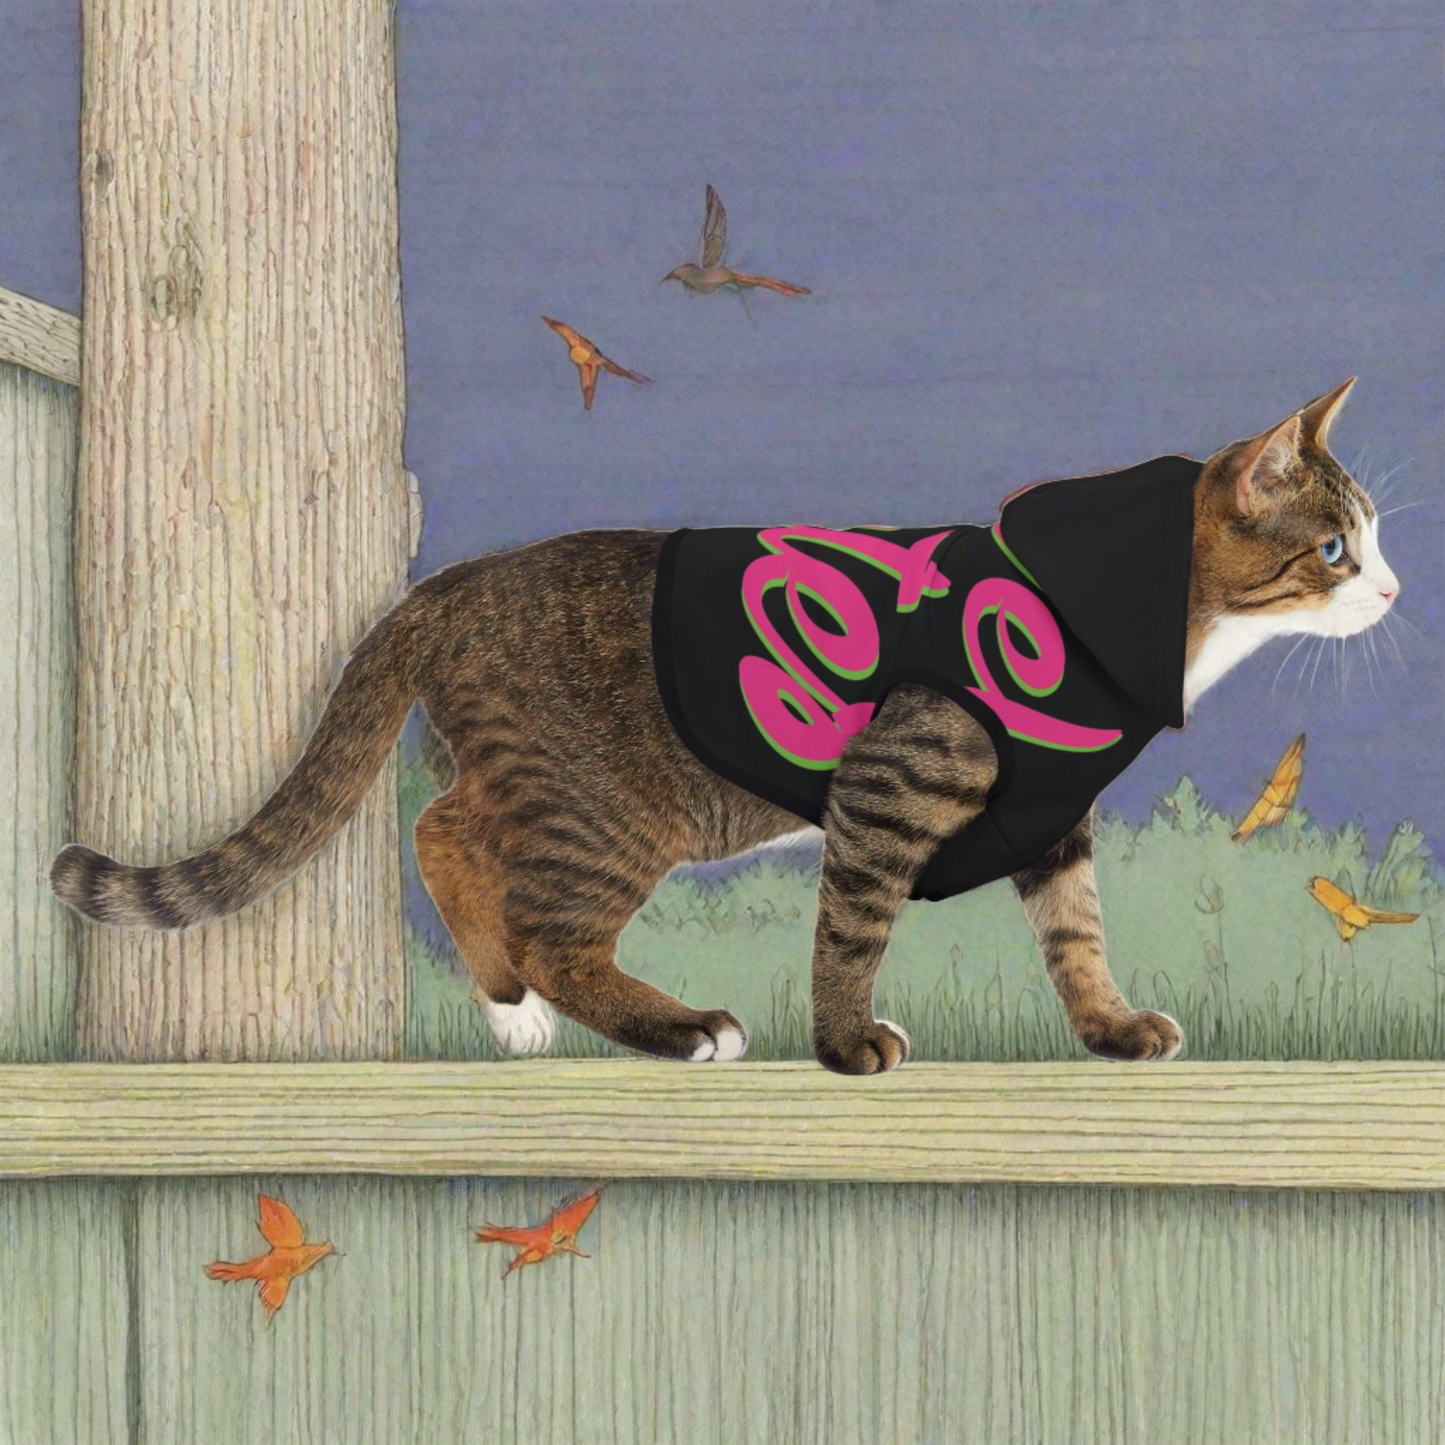 Pet Hoodie | for Dogs and Cats | Black & Fuchsia RevelMates Design